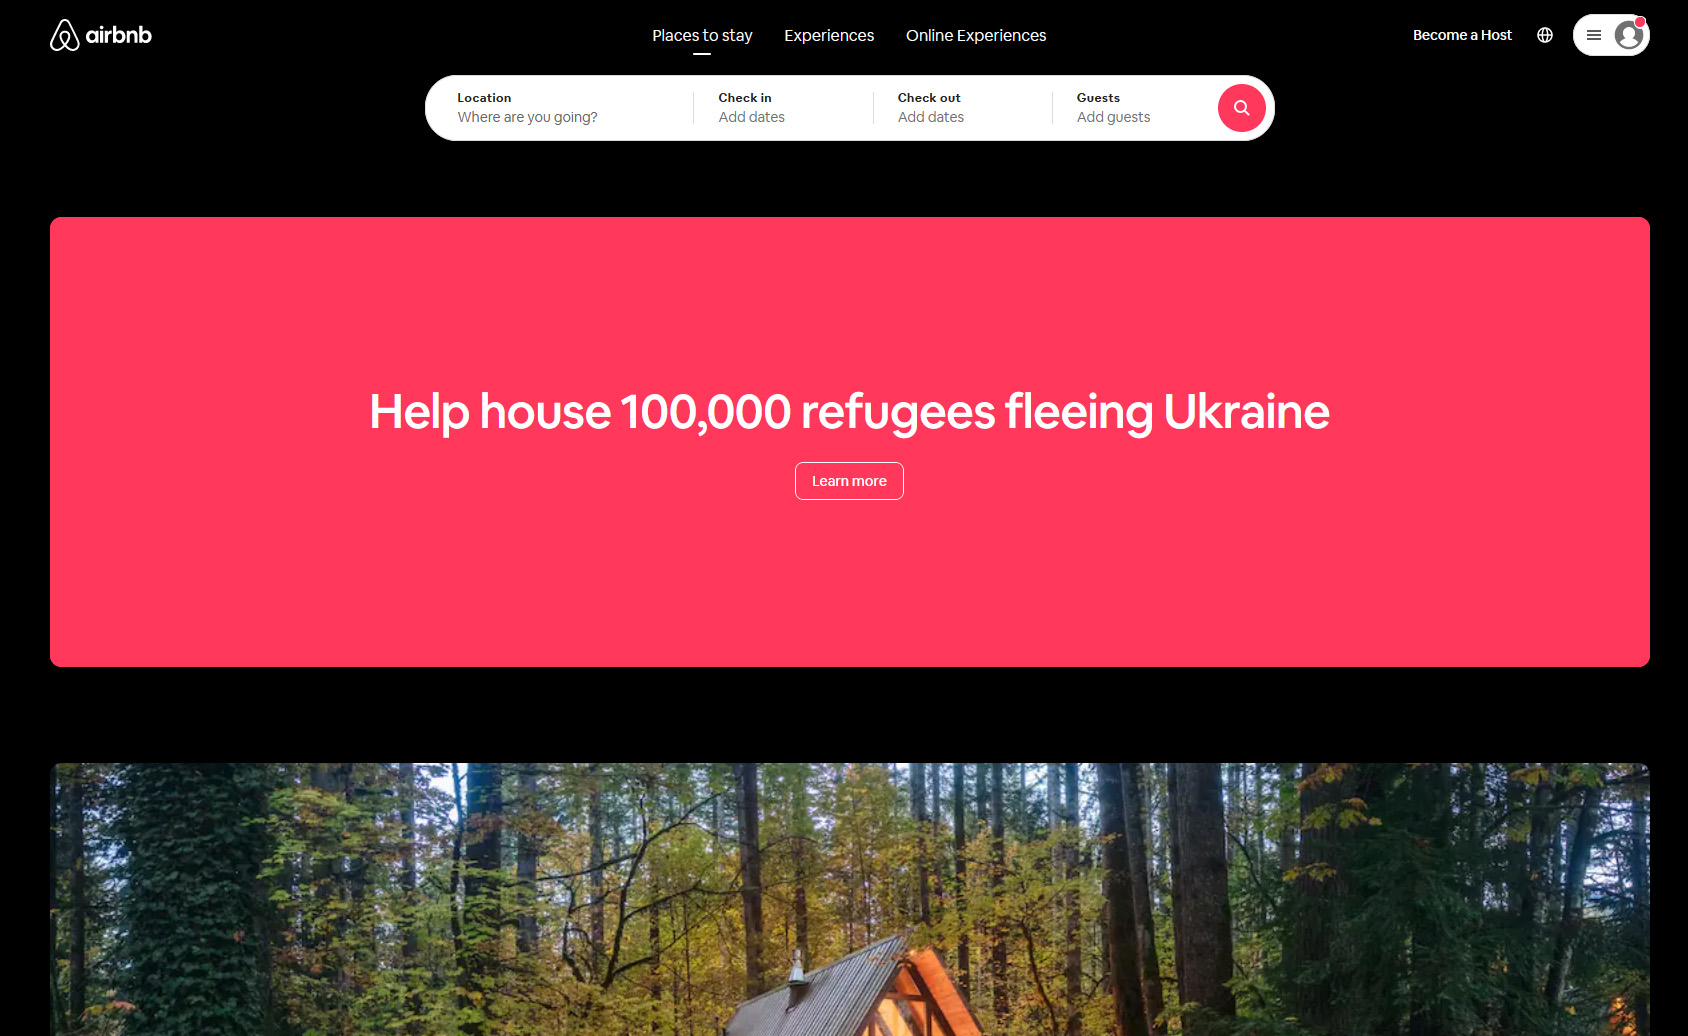 The home page of Airbnb shows a giant neon pink banner asking people to help host 100,000 Ukrainian refugees.